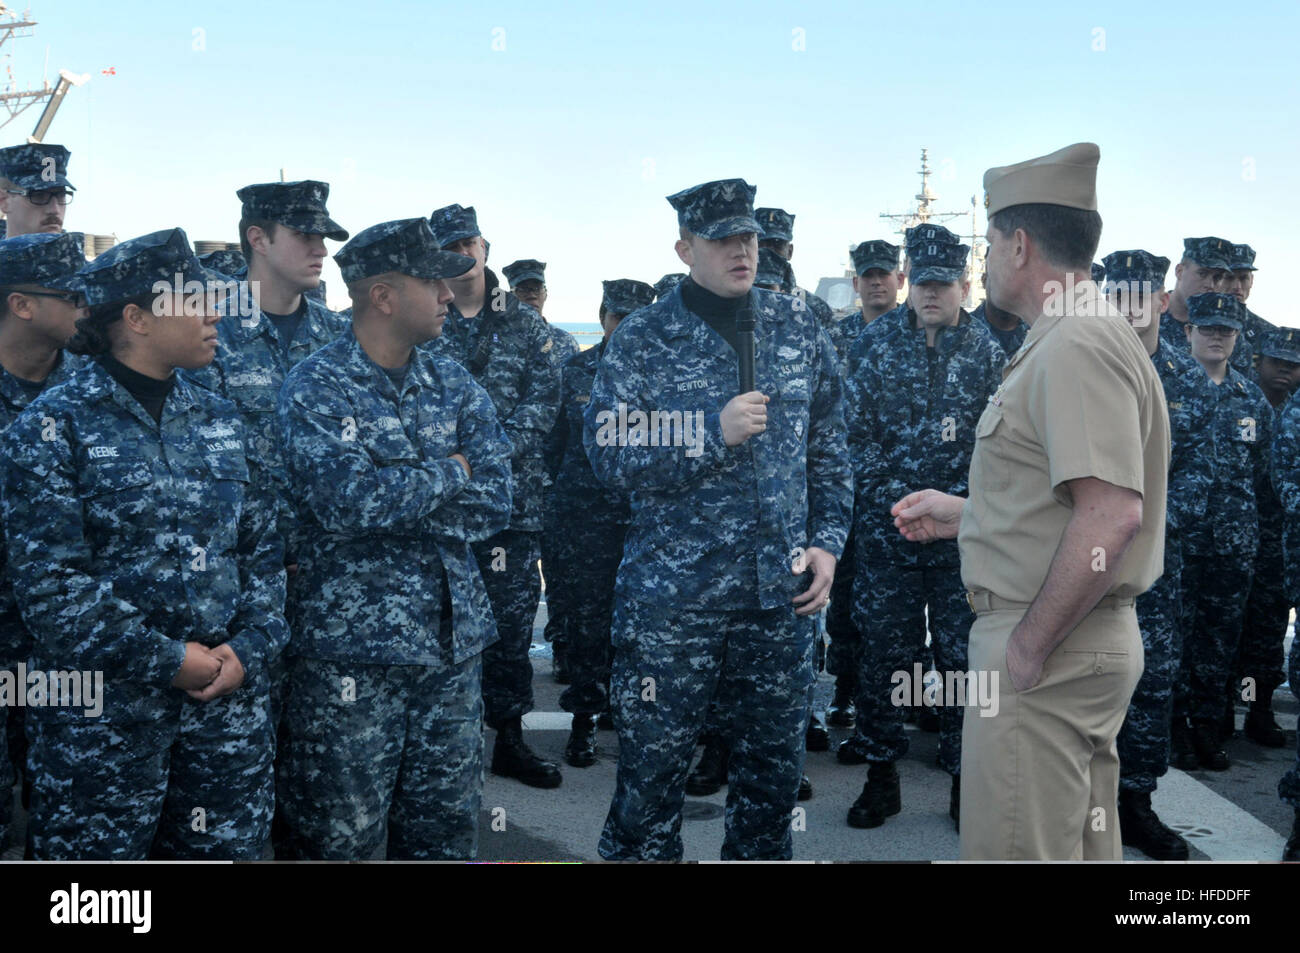 U.S. Navy Vice Adm. Bill Moran, foreground right, the chief of naval personnel, listens to a question from Hospital Corpsman 1st Class Jessie Newton, center right, aboard the amphibious transport dock ship USS New York (LPD 21) at Naval Station Mayport, Fla., Jan. 17, 2014. The naval station was the New York?s new home port after the ship was reassigned from Naval Station Norfolk, Va., as part of a larger move of the Iwo Jima Amphibious Ready Group. (U.S. Navy photo by Mass Communication Specialist 3rd Class Angus Beckles/Released) U.S. Navy Vice Adm. Bill Moran, foreground right, the chief of Stock Photo